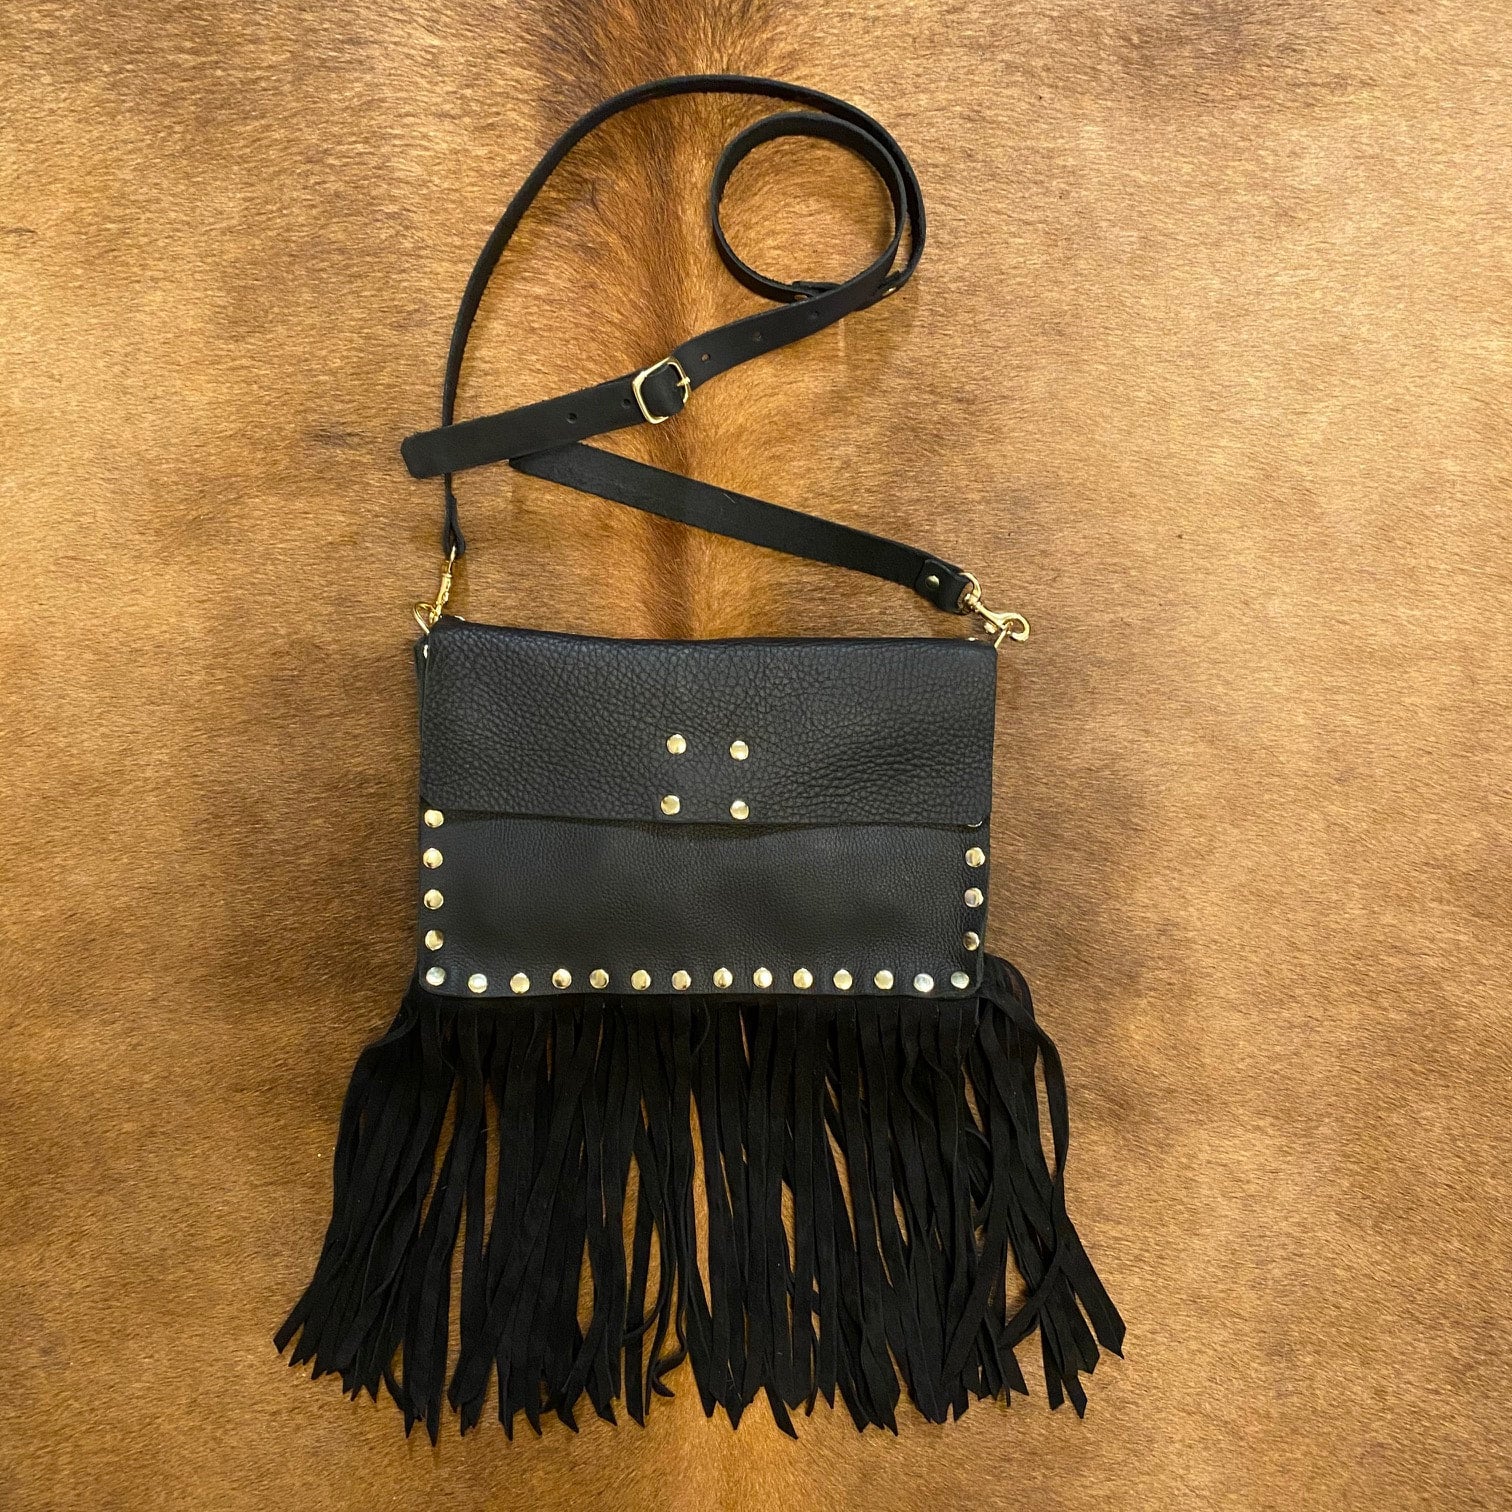 Fringe Crossbody Black with Gold  FAITH BY KRISTY WHITE LEATHER